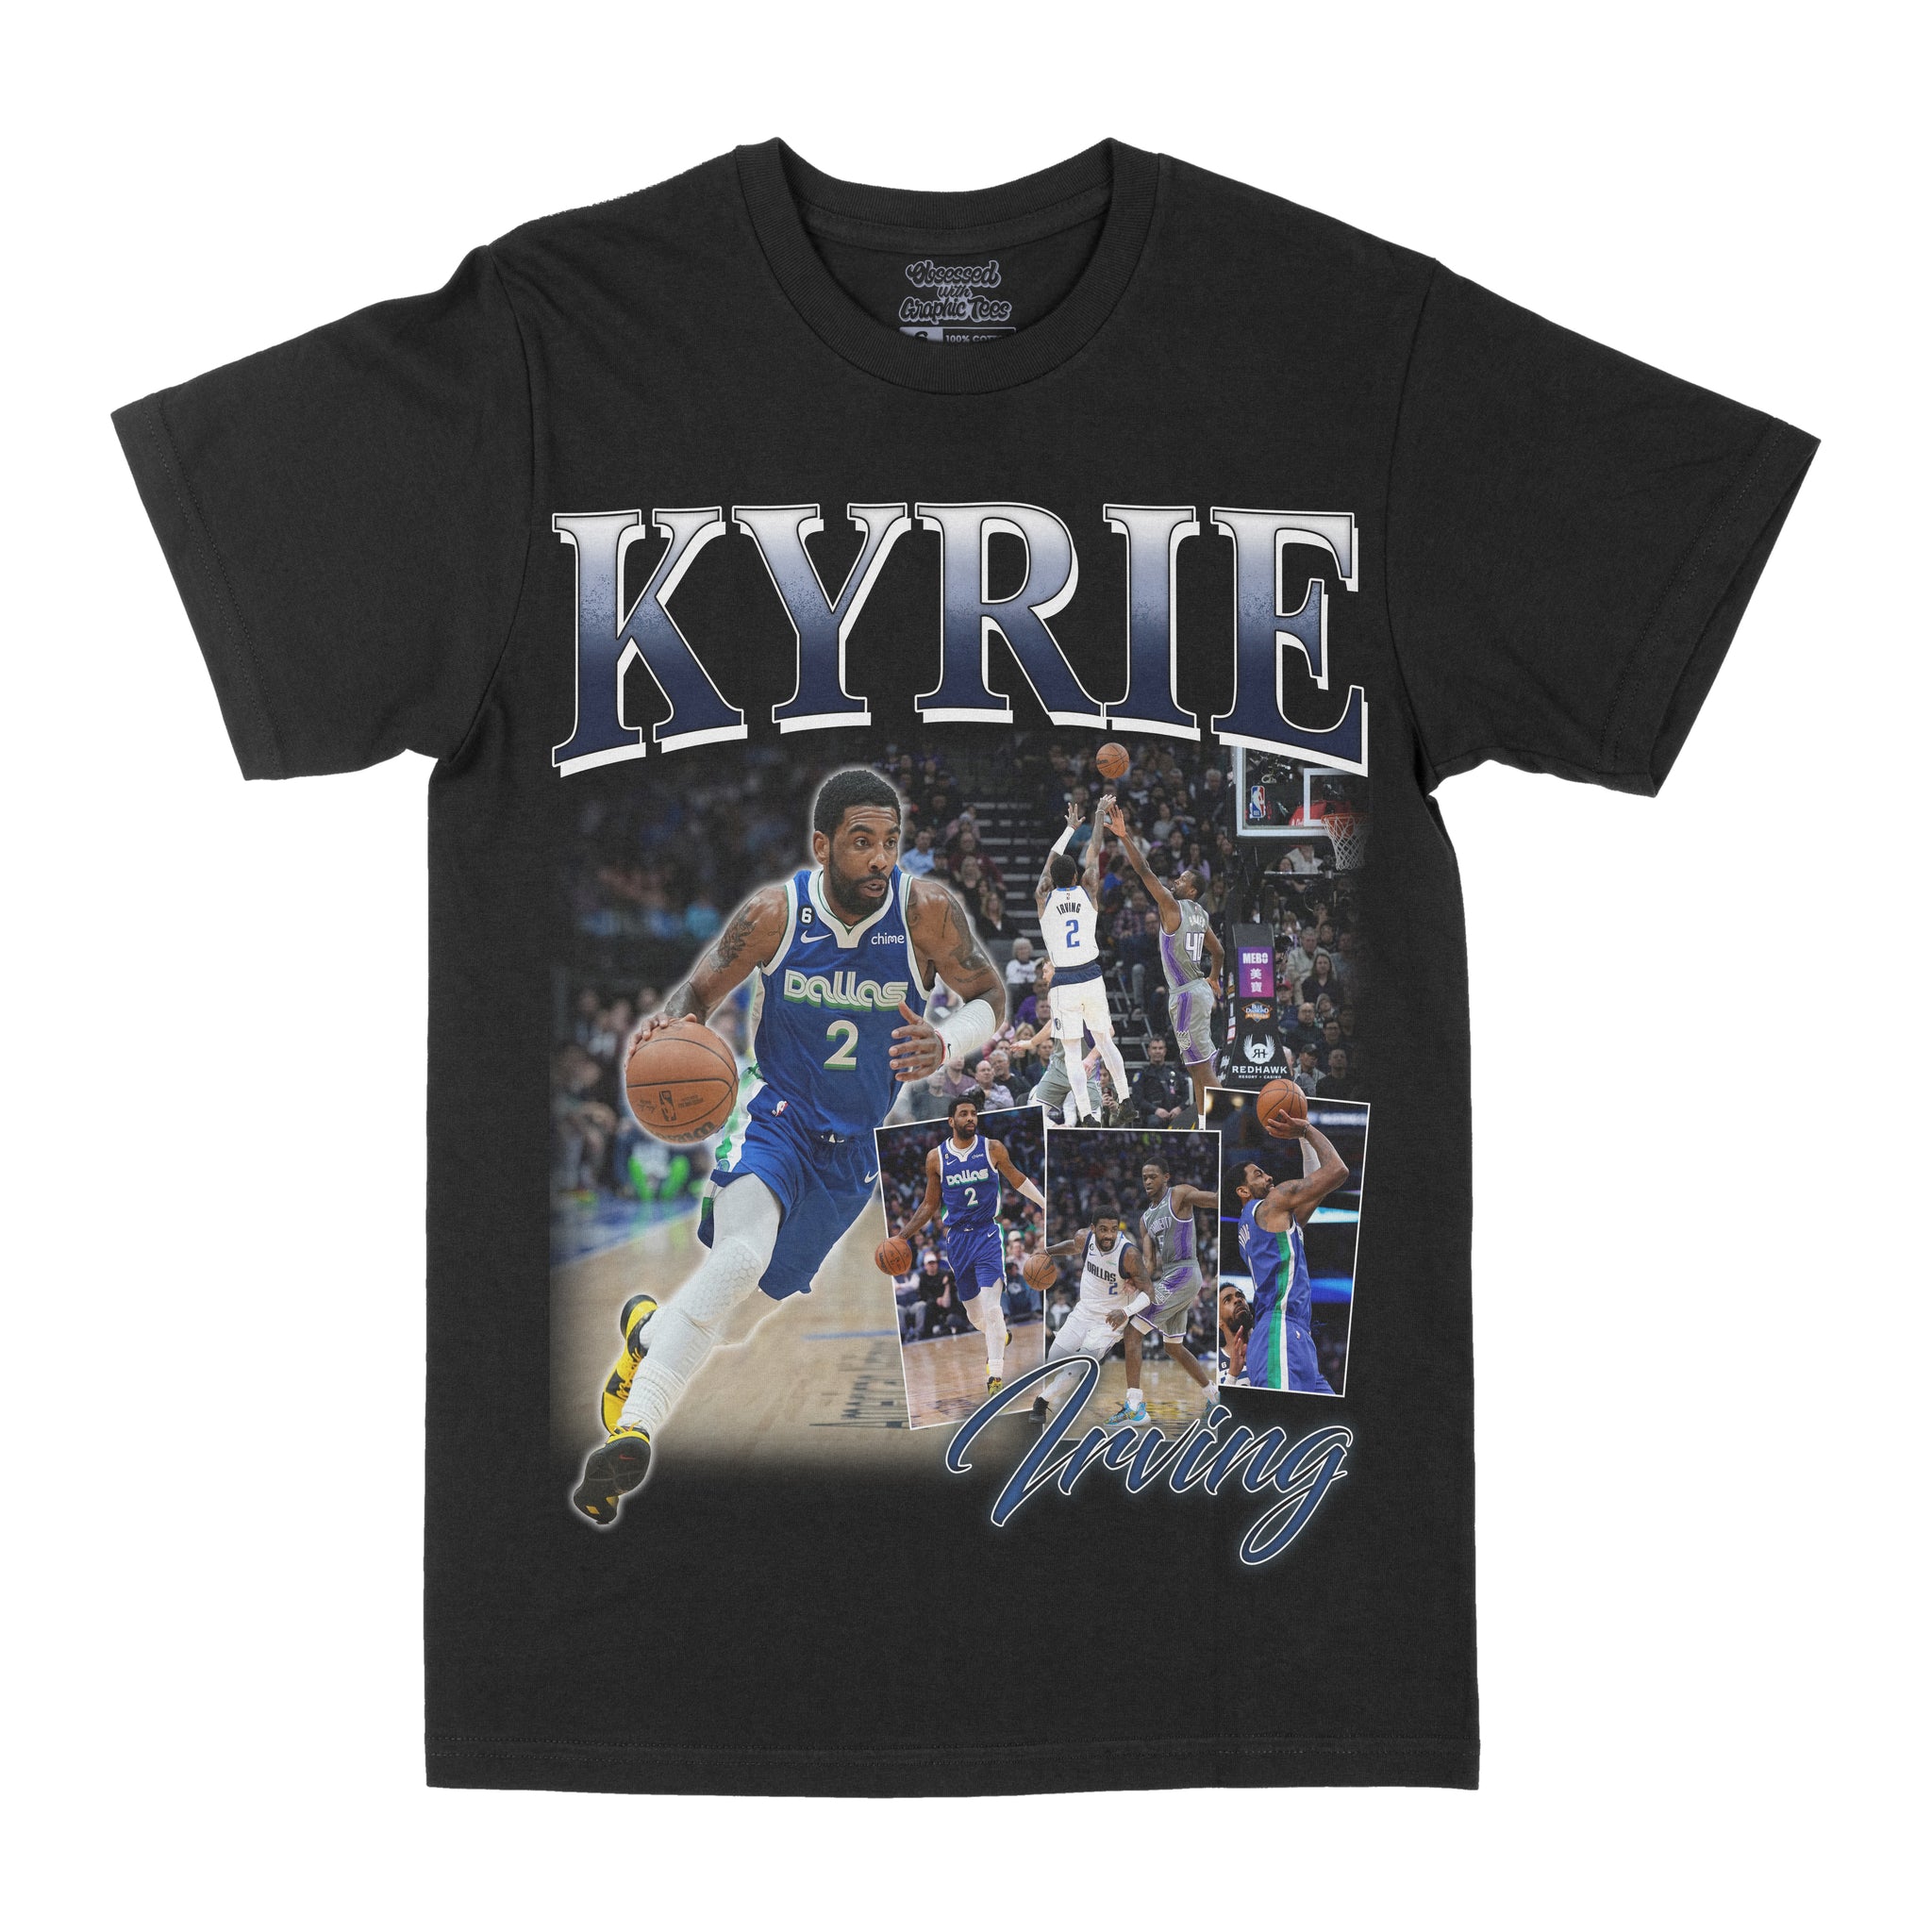 Kyrie Irving Graphic Tee